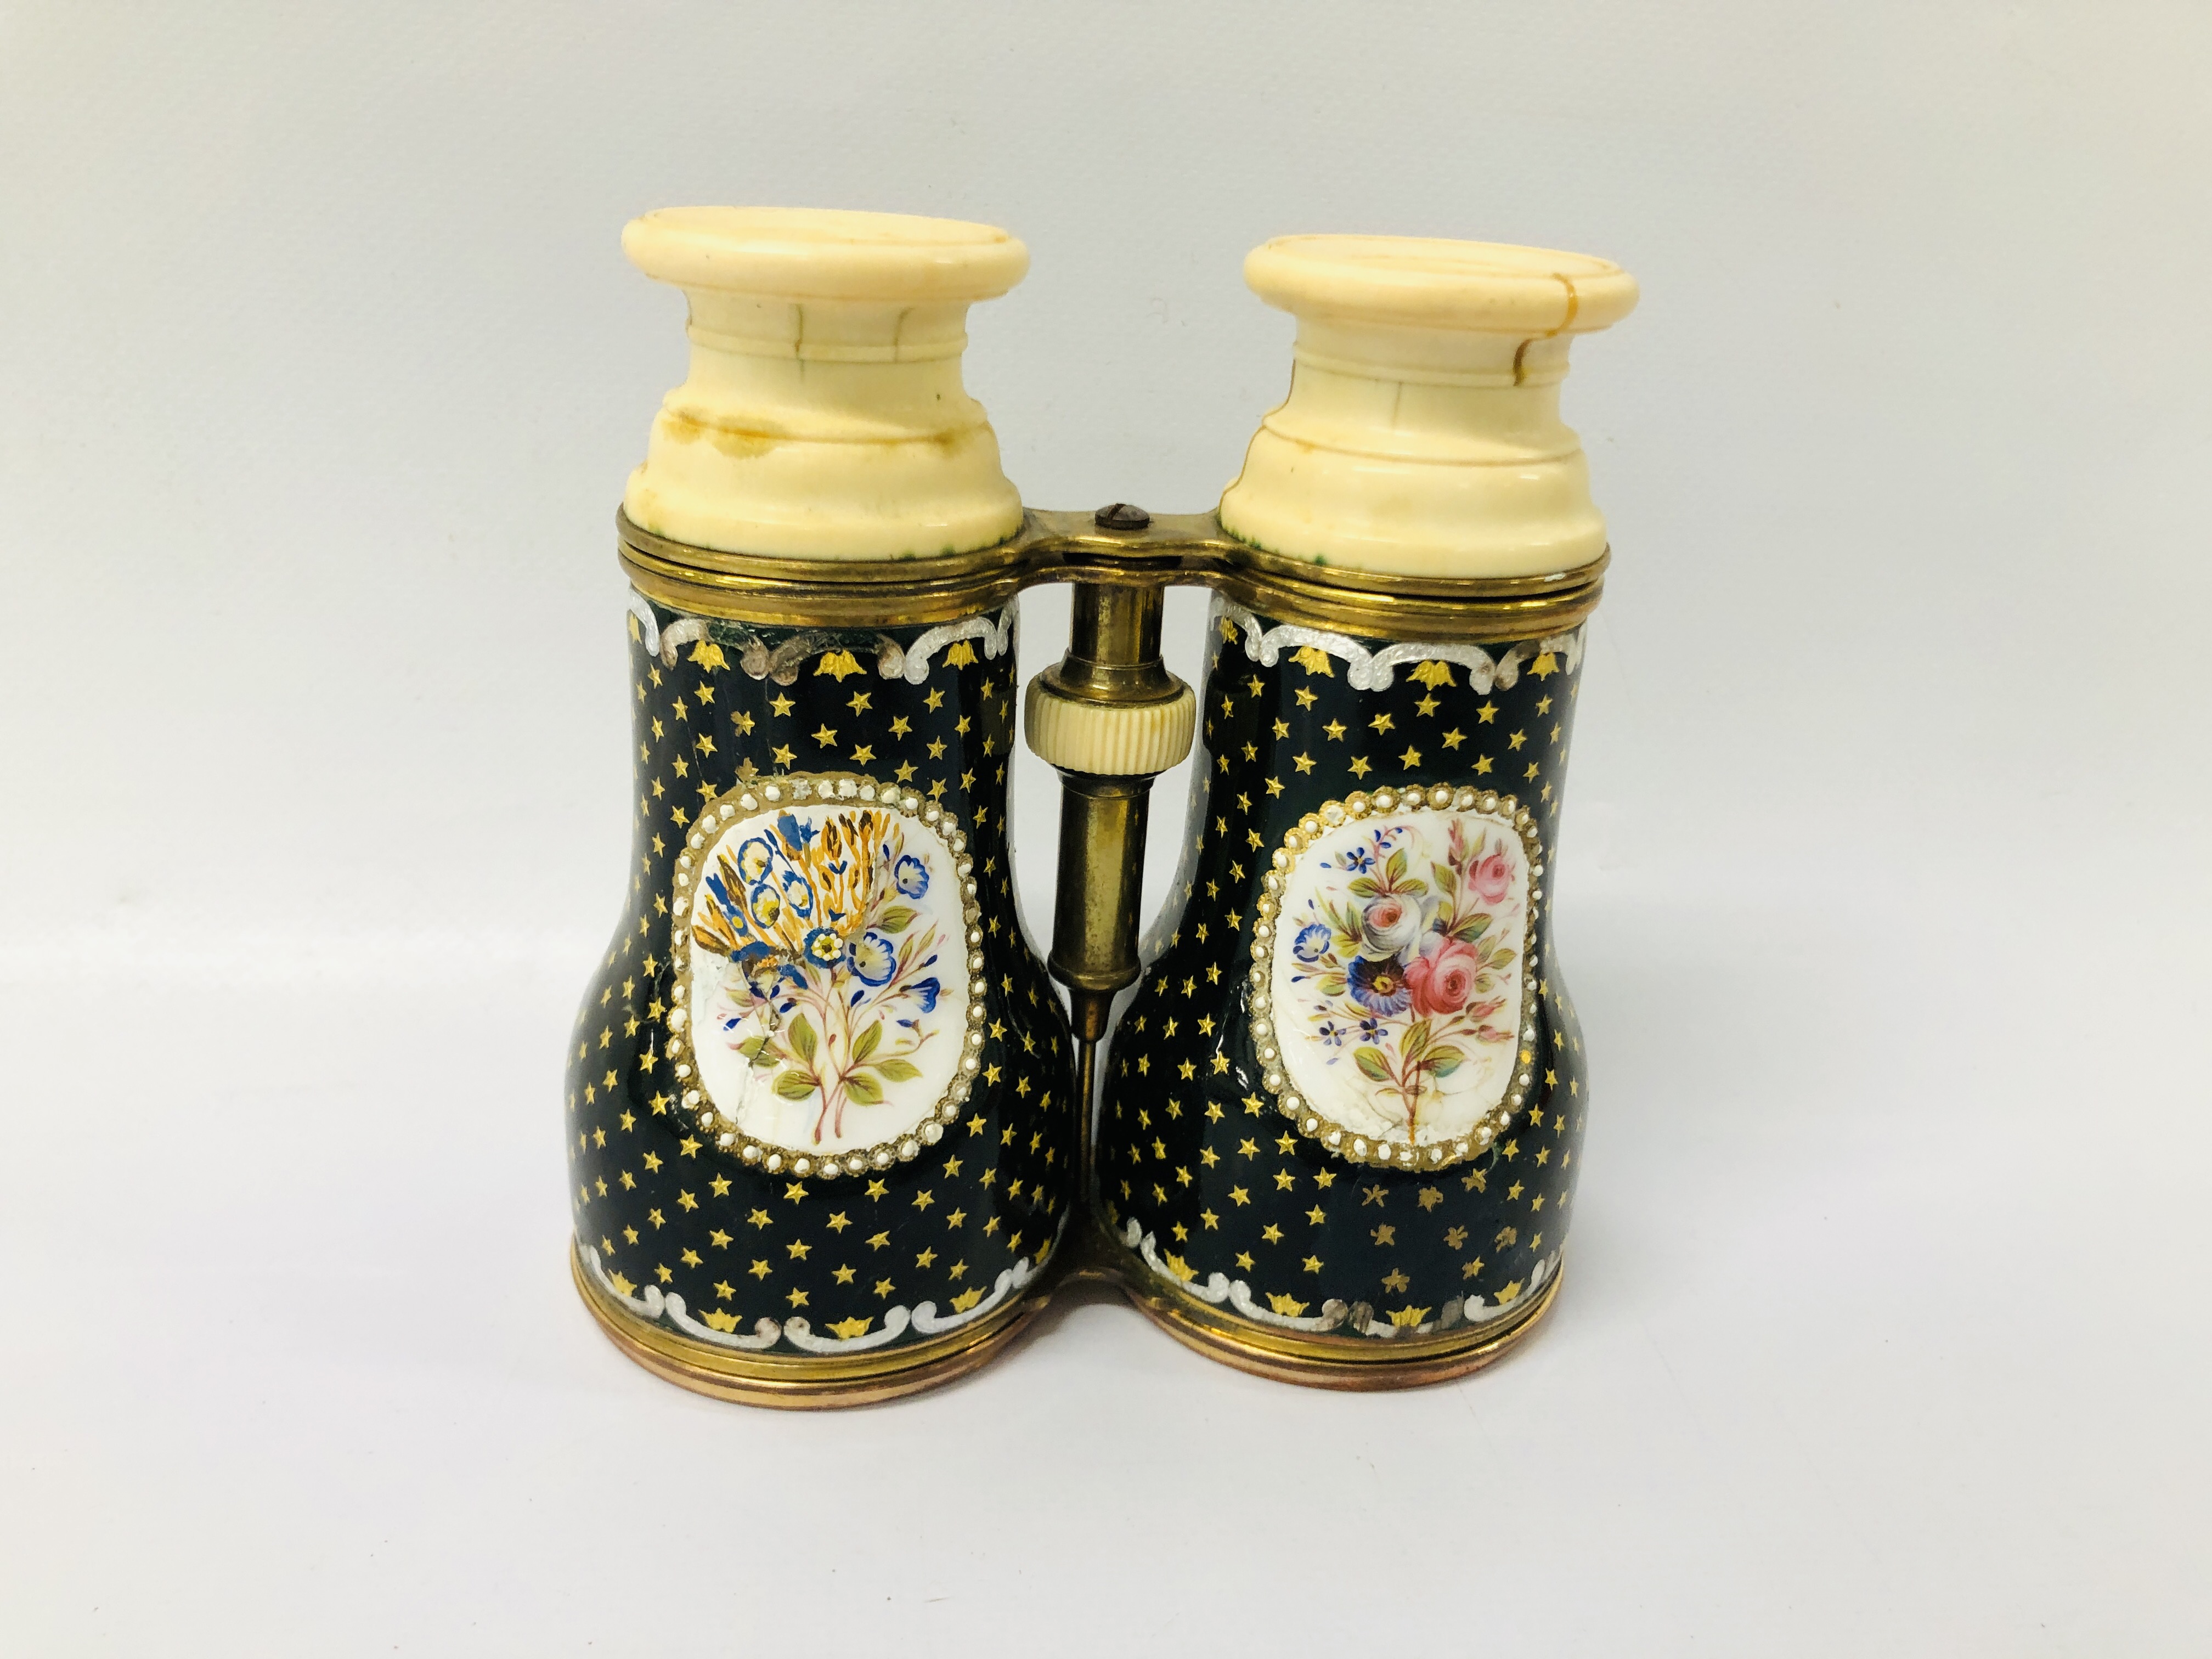 PAIR OF ANTIQUE IVORY AND ENAMEL OPERA GLASSES C1880 - Image 7 of 8